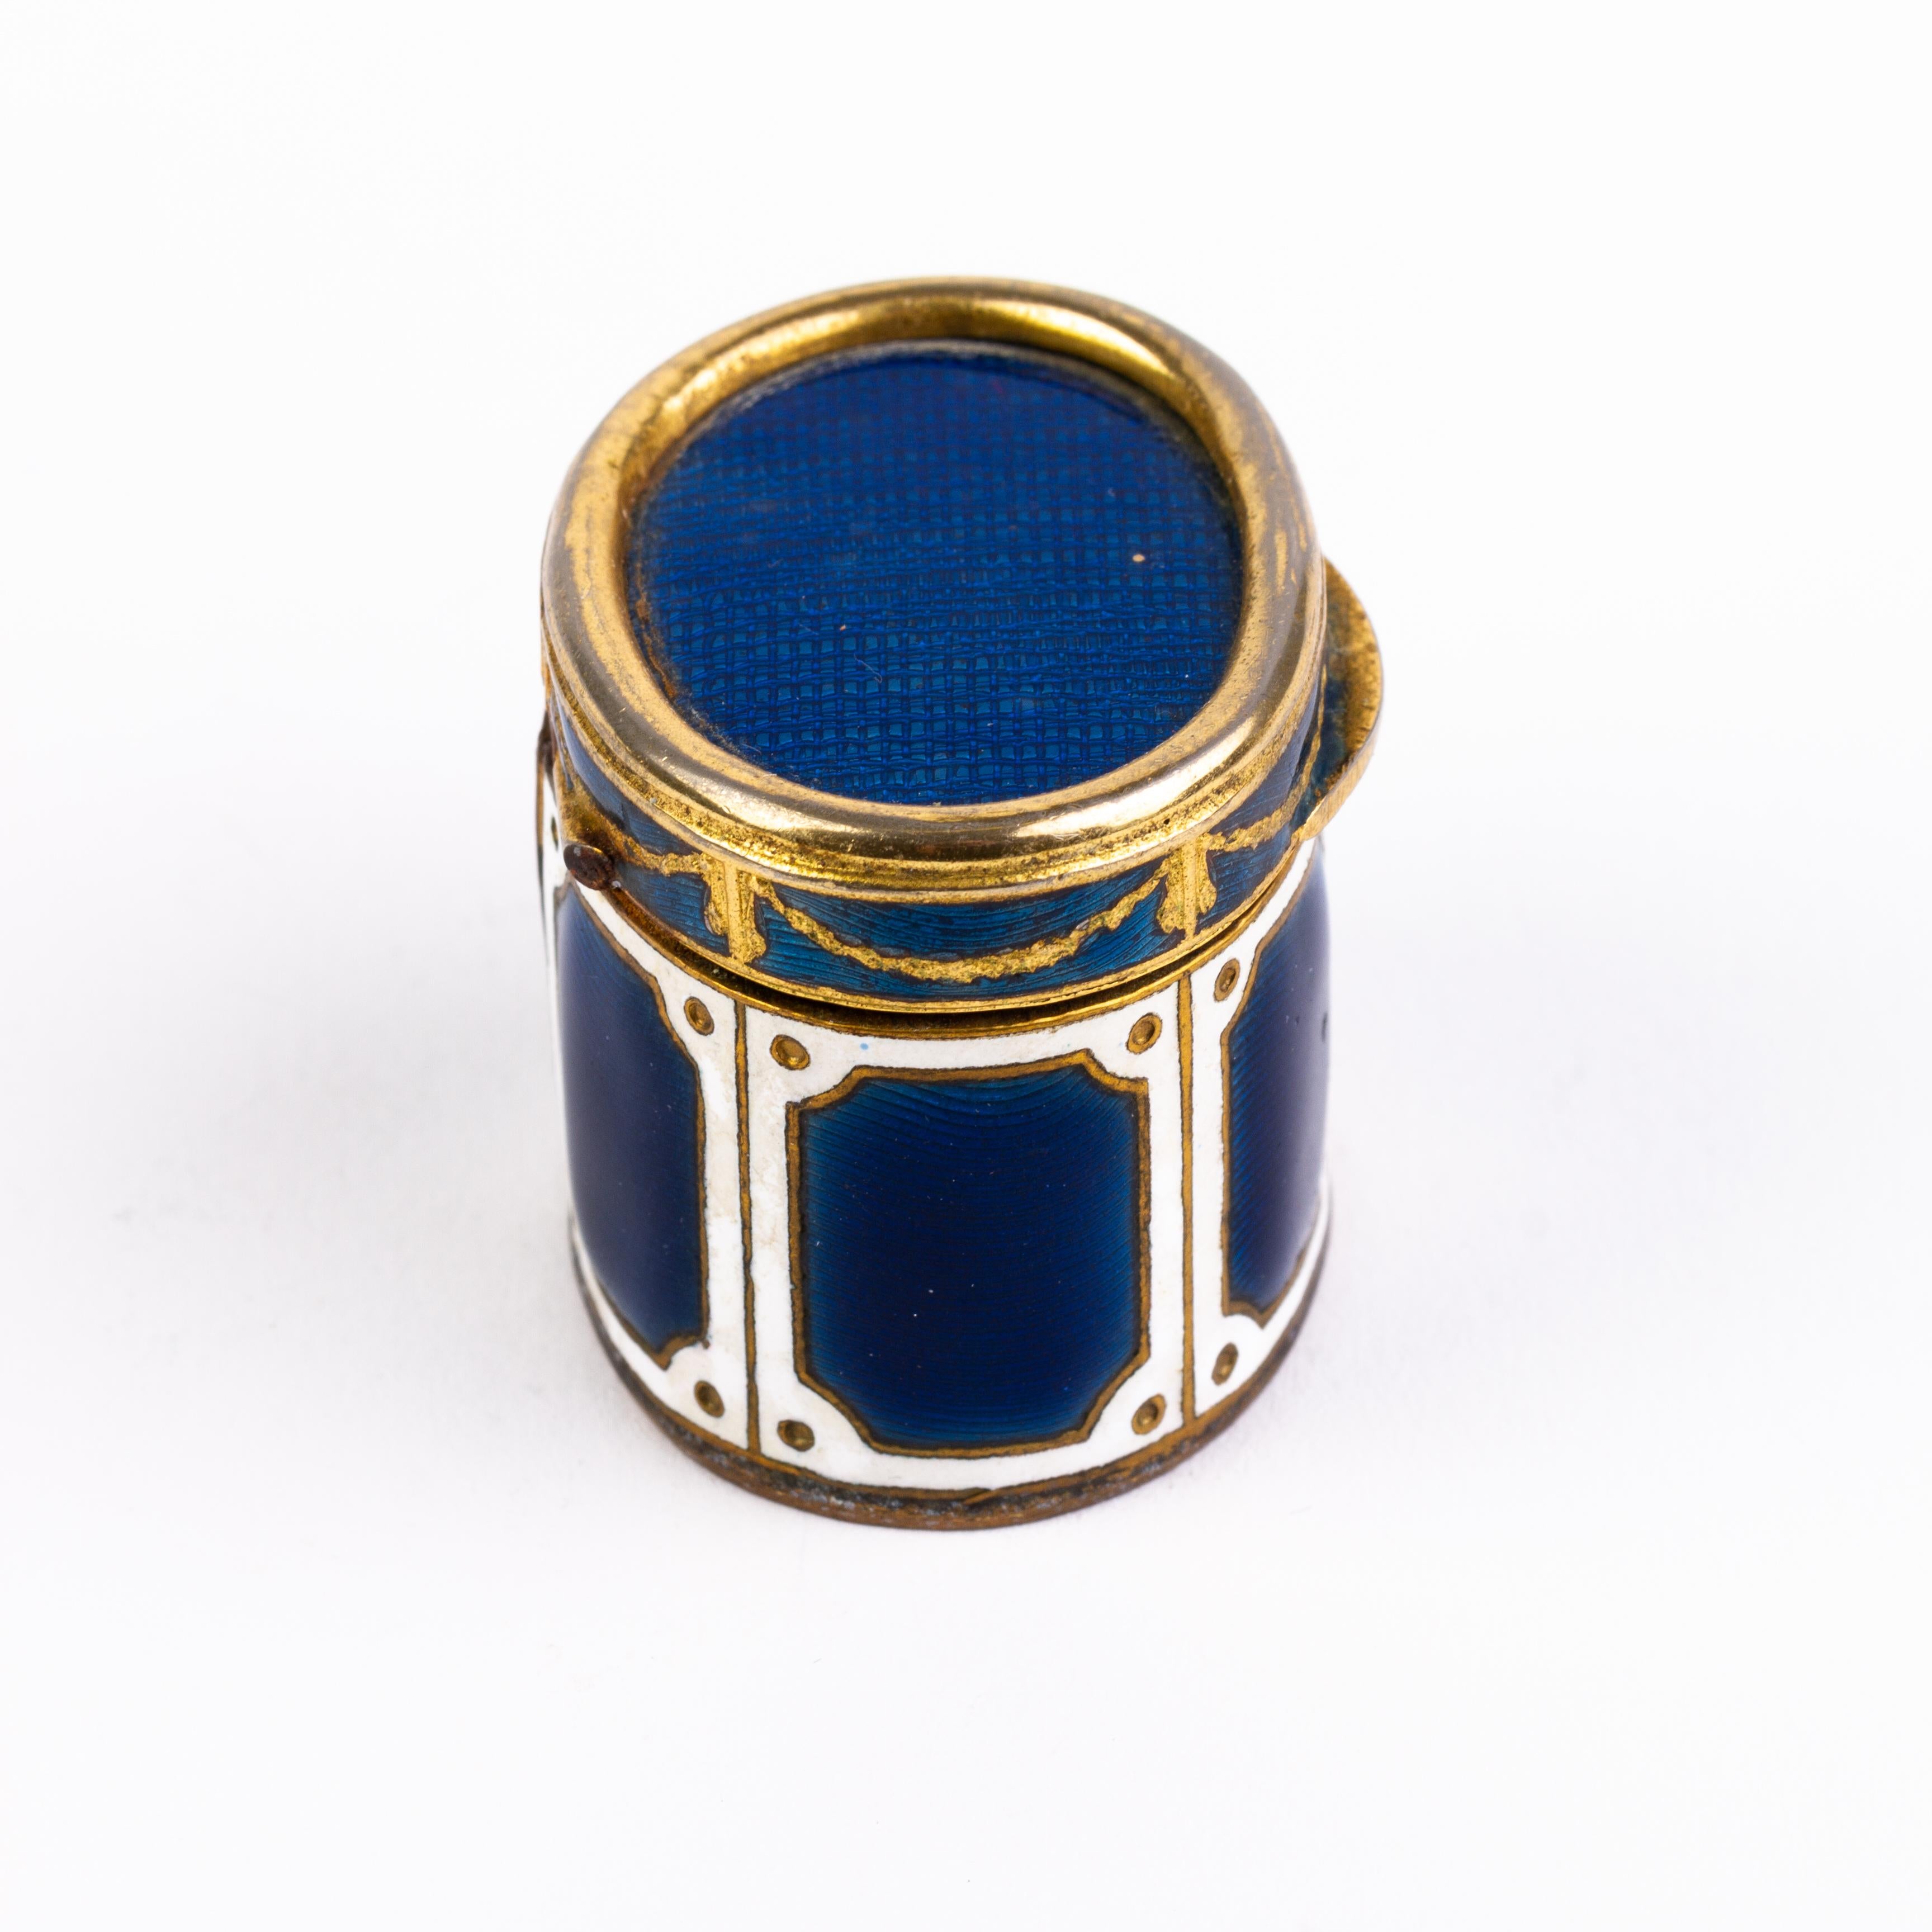 Rare French Guilloche Enamel Pill Box 19th Century 
Good condition 
From a private collection.
Free international shipping.